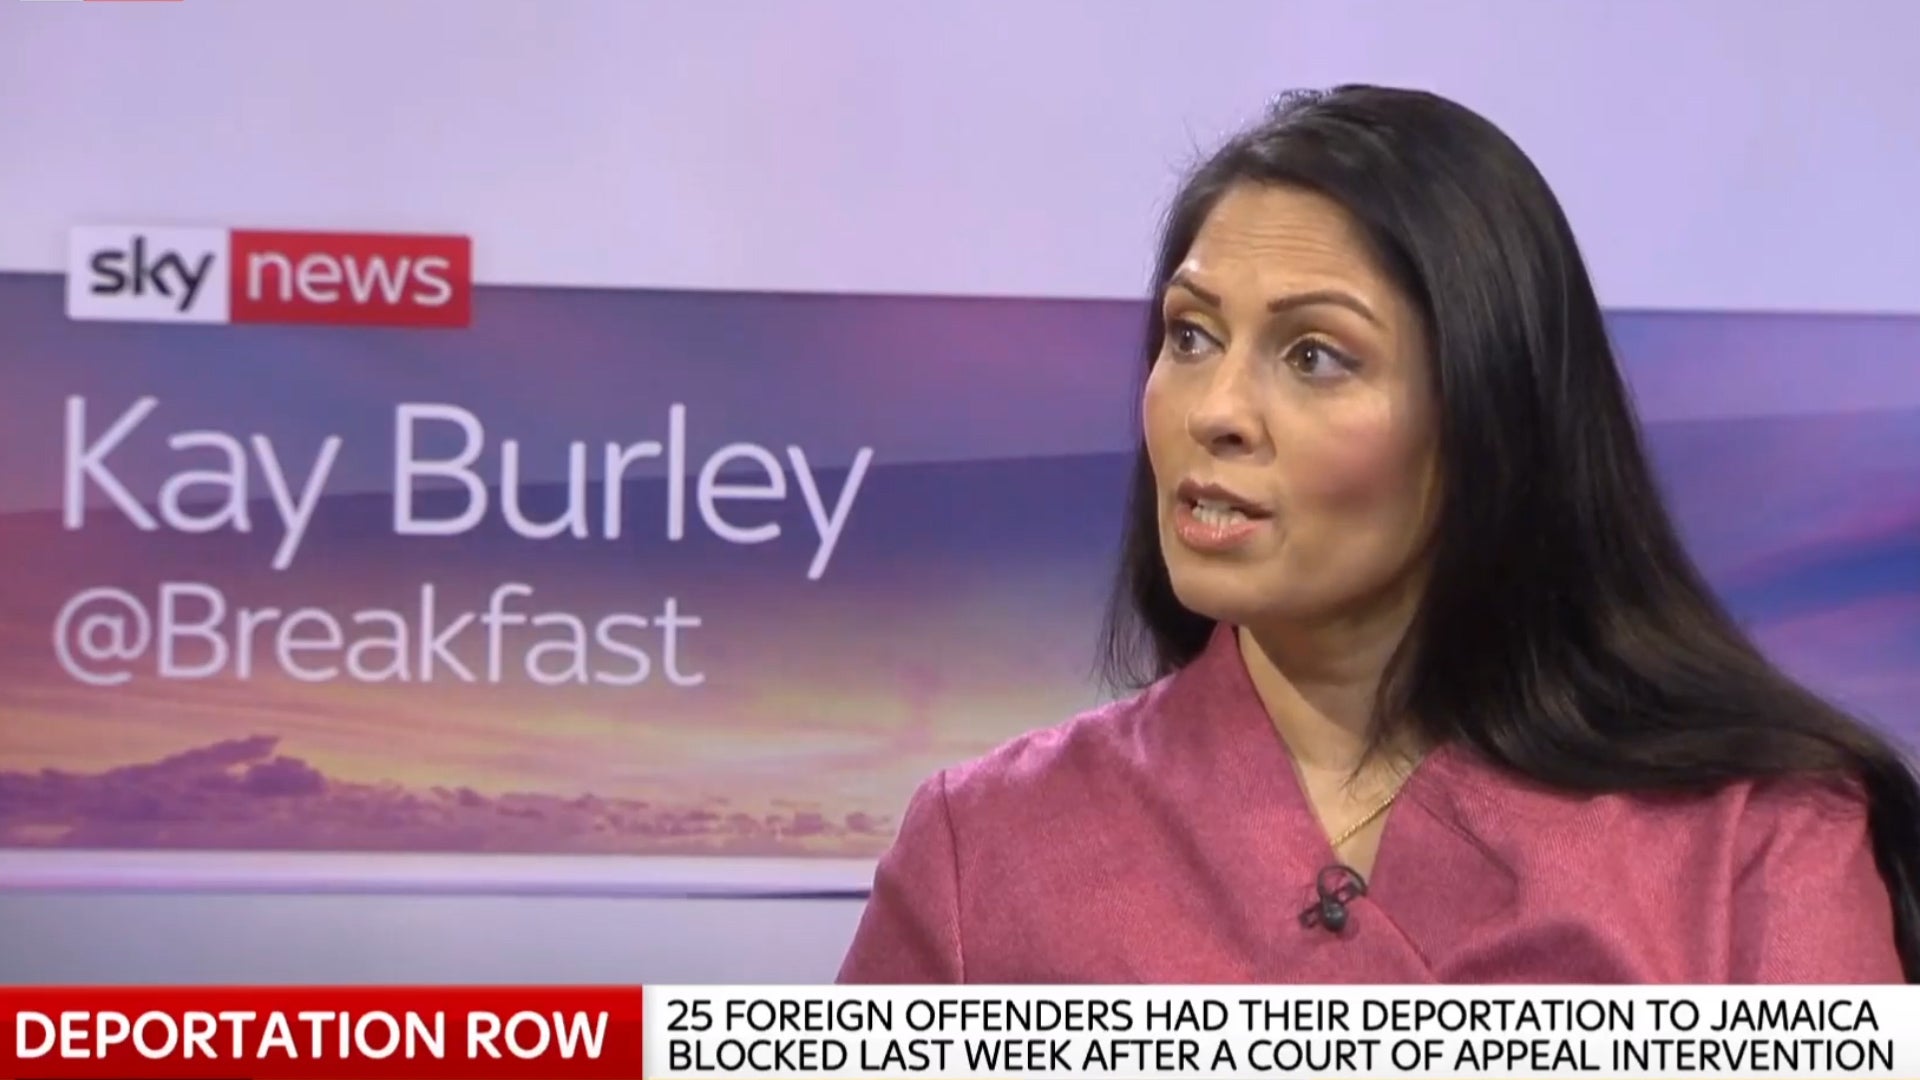 Priti Patel says there is 'no such thing' as dabbling in drugs, despite Boris Johnson and other cabinet members having admitted dabbling in drugs